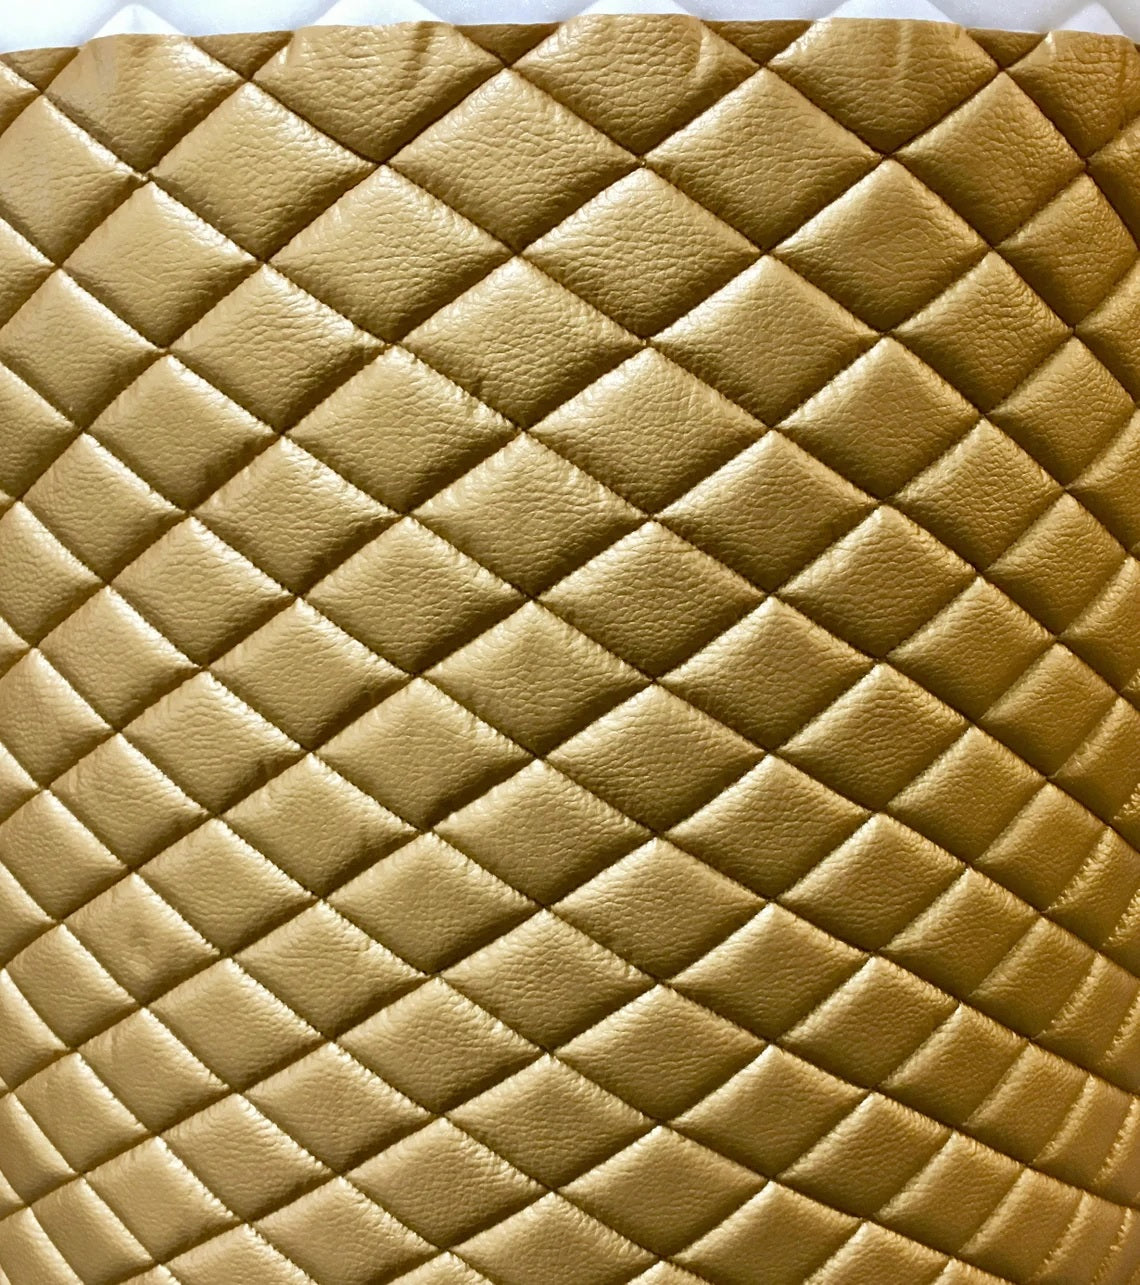 Gold Metallic Champion Diamond Quilted Faux Leather Vinyl 3/8" Foam Back 54" Wide | Upholstery Fabric by the Yard